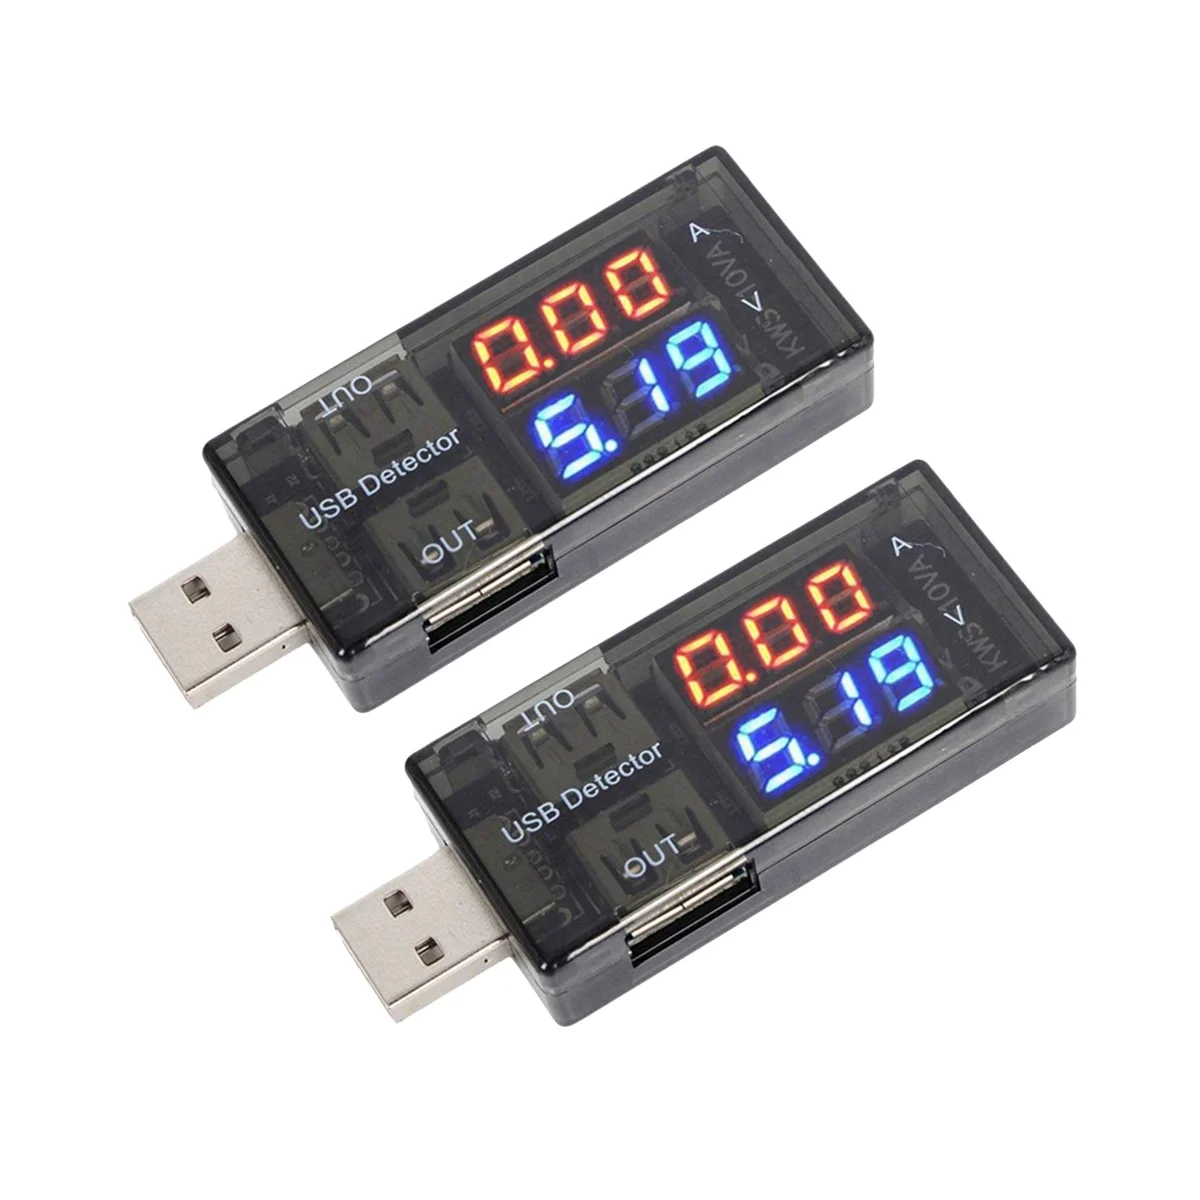 

2PCS USB Detector Digital Multimeter Meter Power Tester Current Voltage Battery Monitor with LED Display for Power Bank